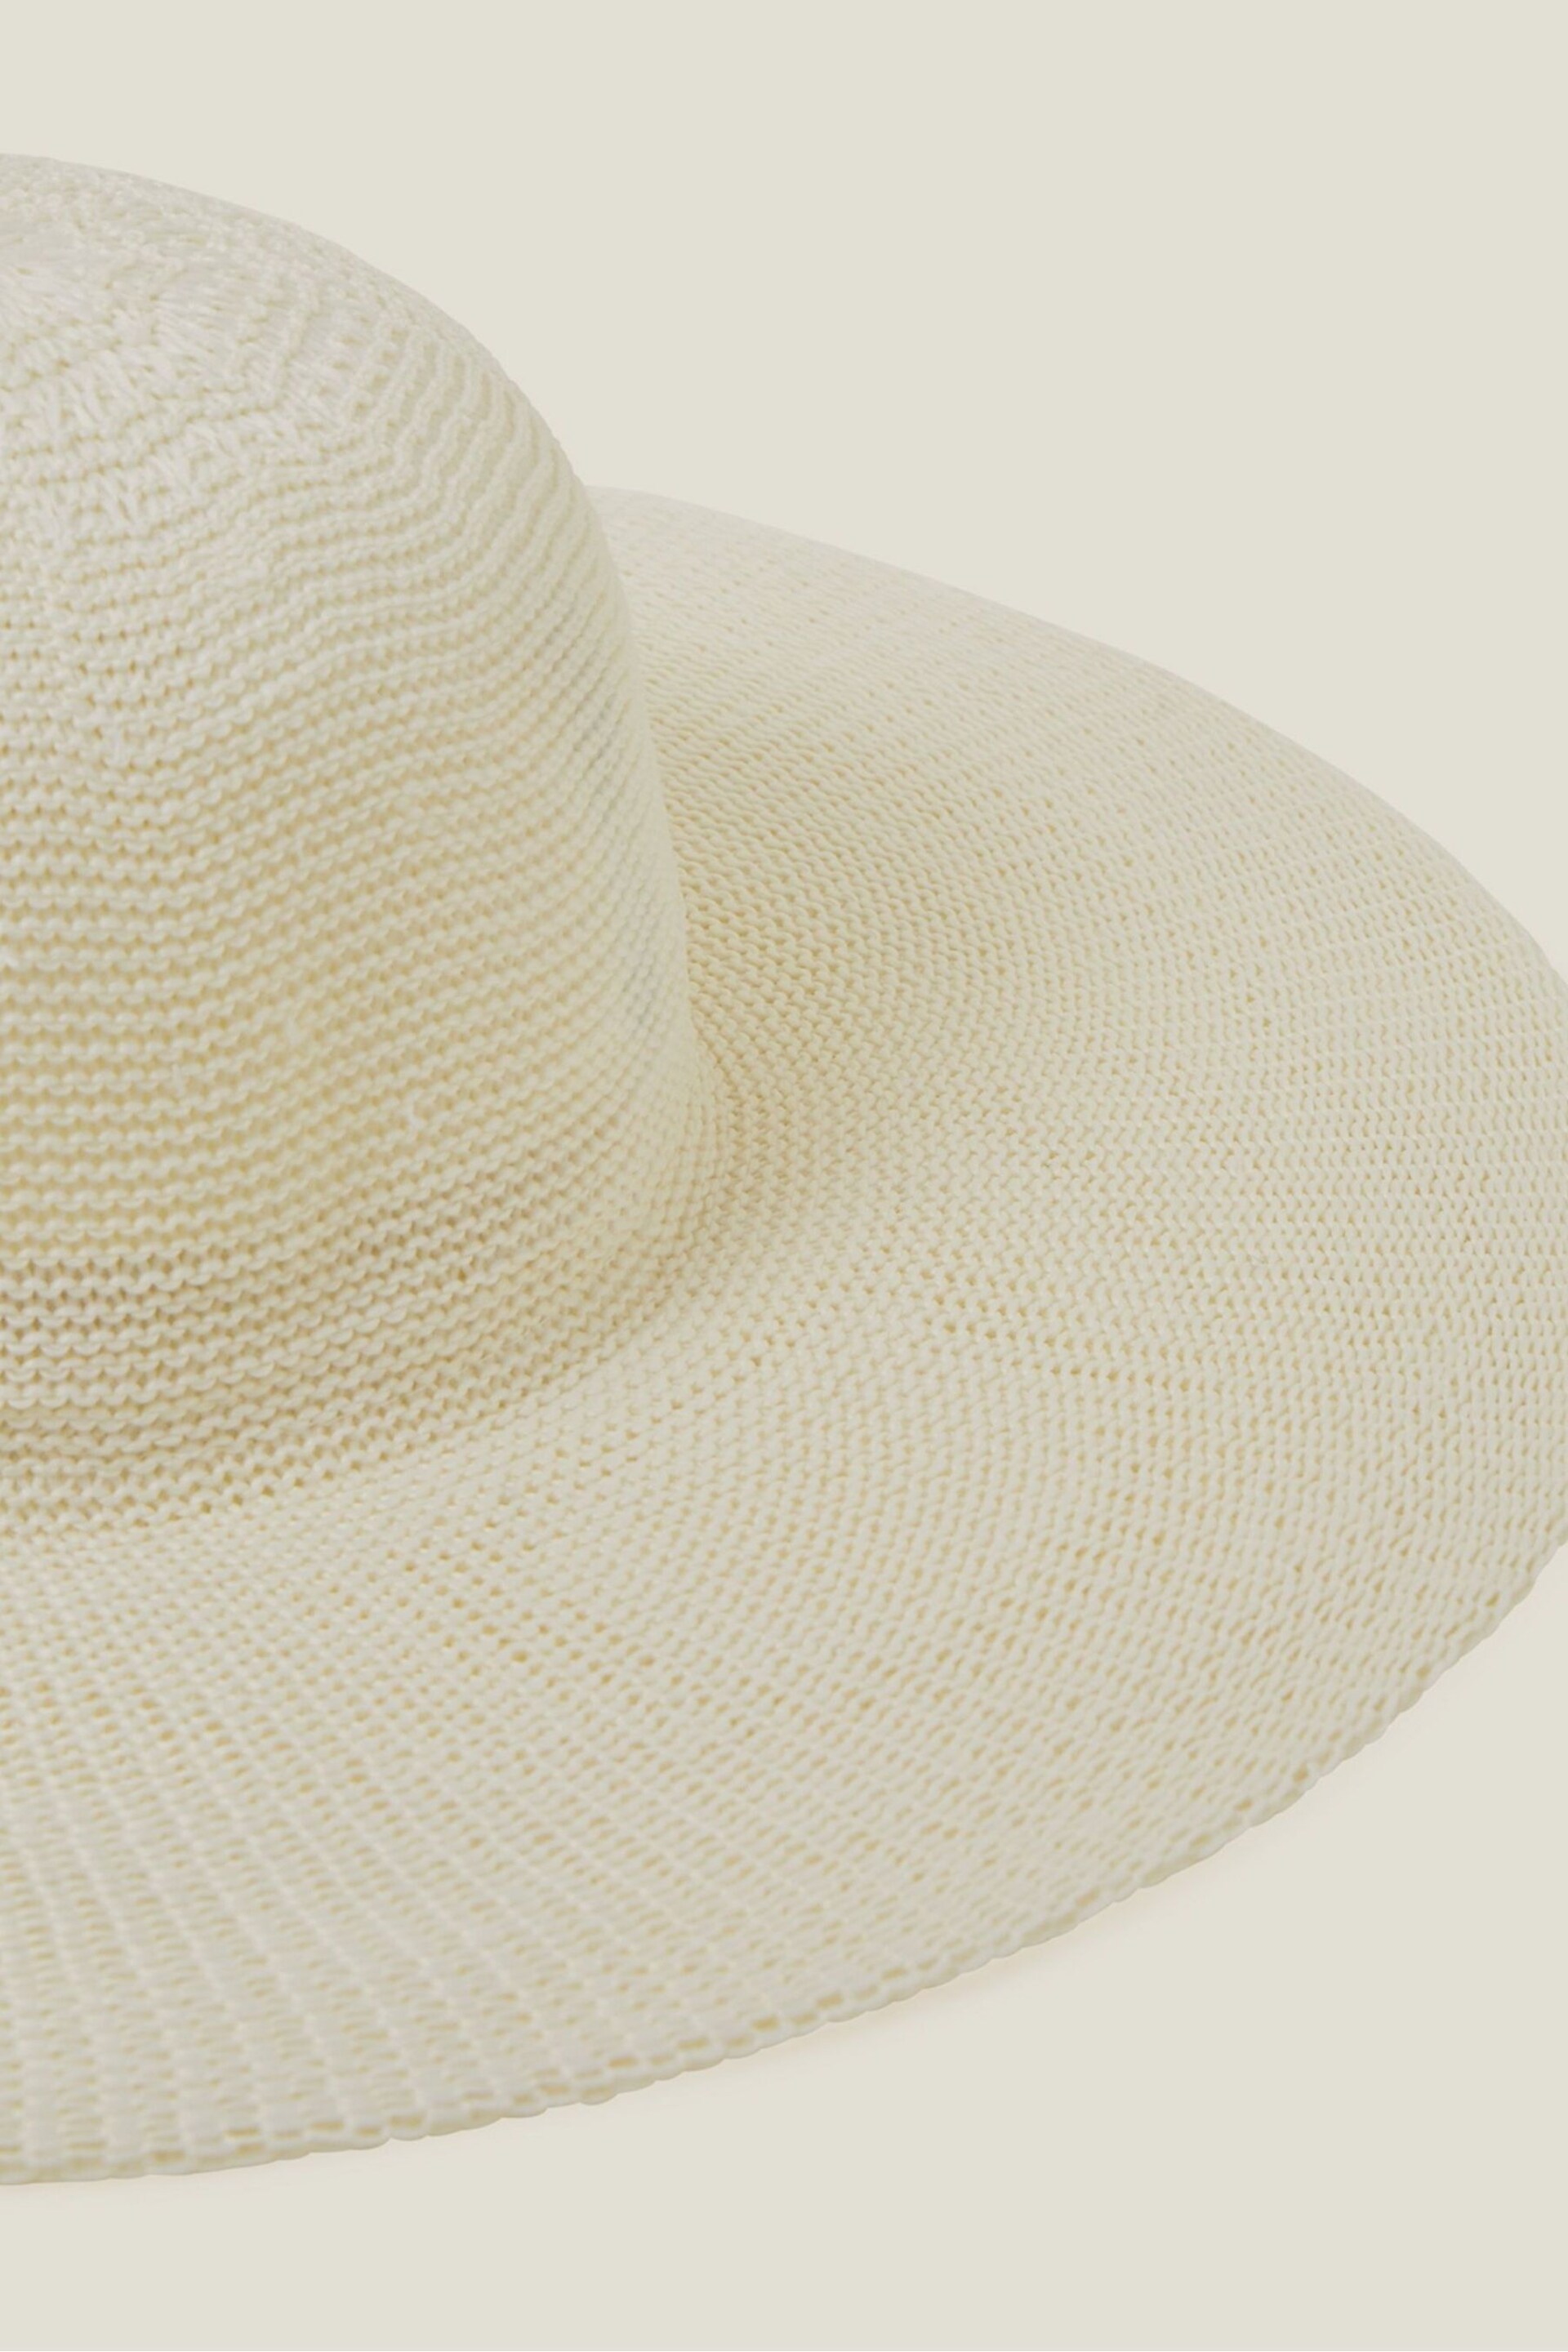 Accessorize Natural Packable Floppy Hat - Image 2 of 3